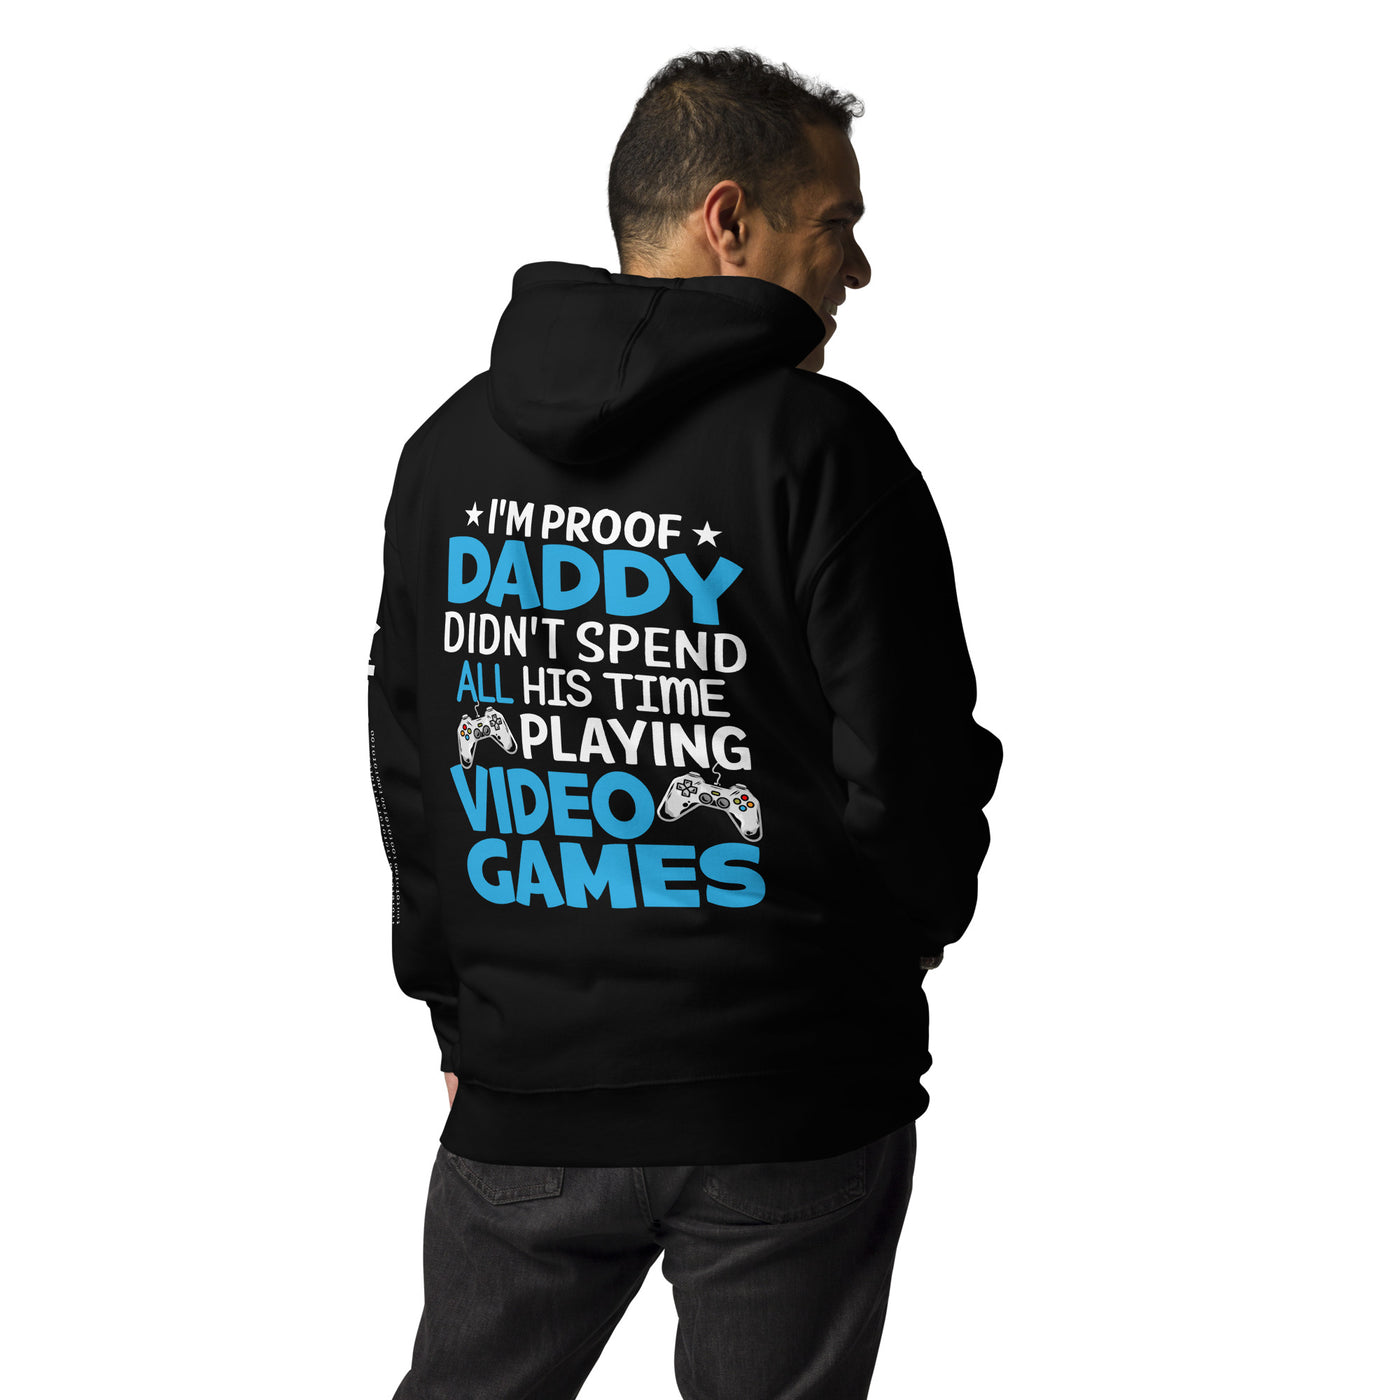 I am Proof * Daddy didn't spend his time playing Video Games* - Unisex Hoodie ( Back Print )